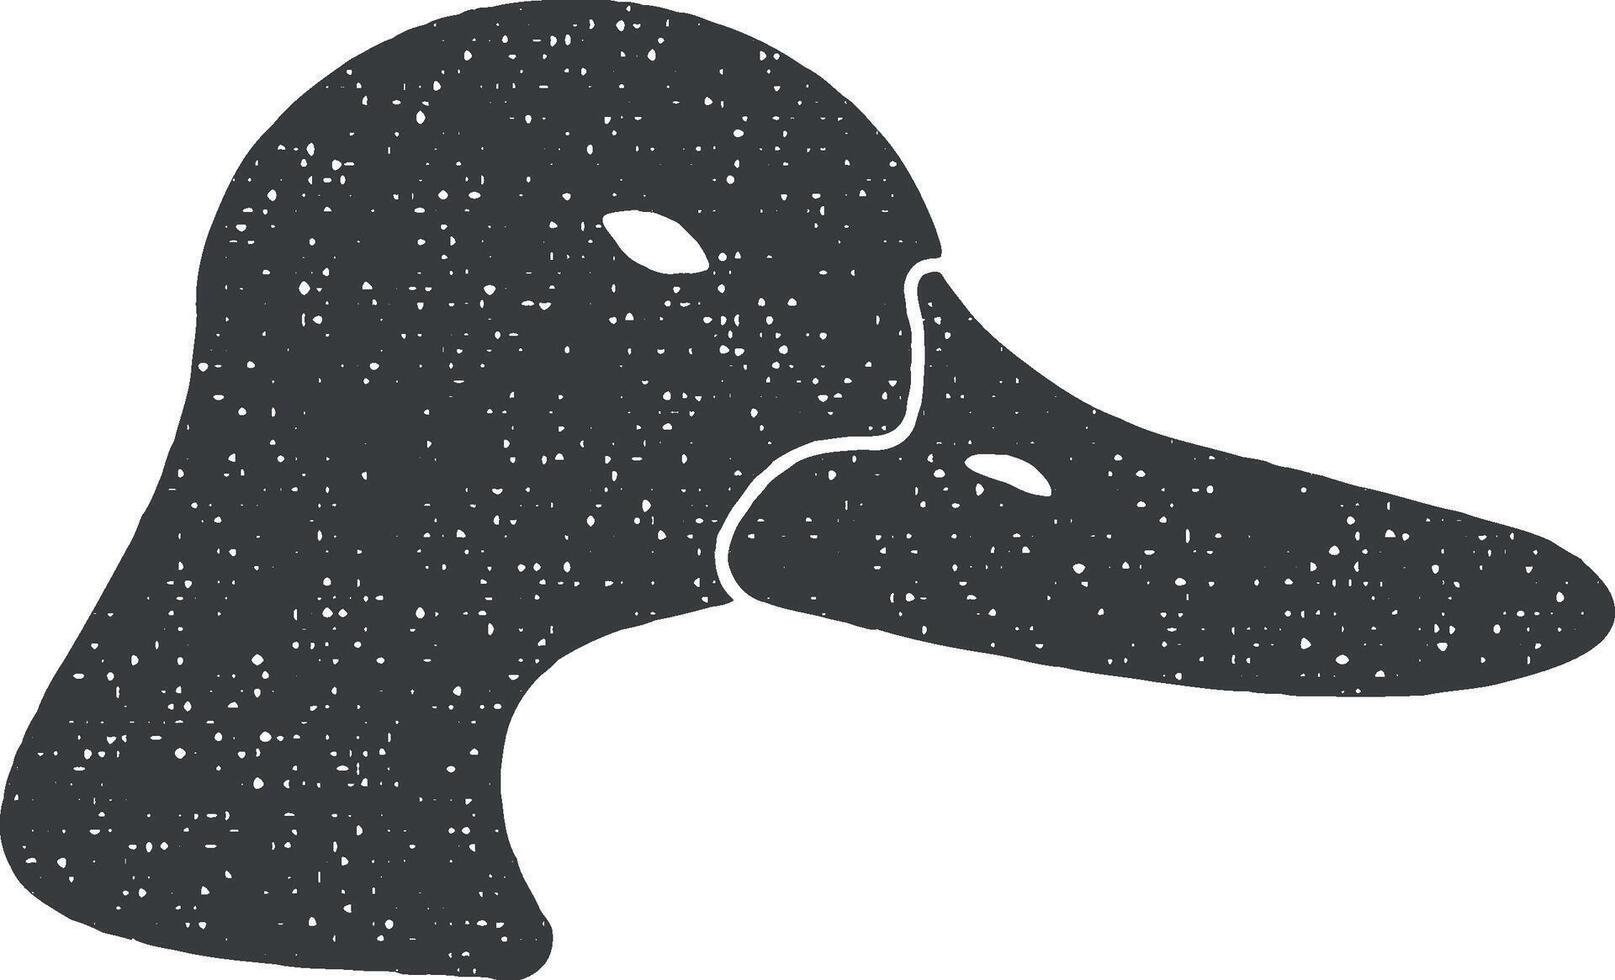 head of duck silhouette vector icon illustration with stamp effect